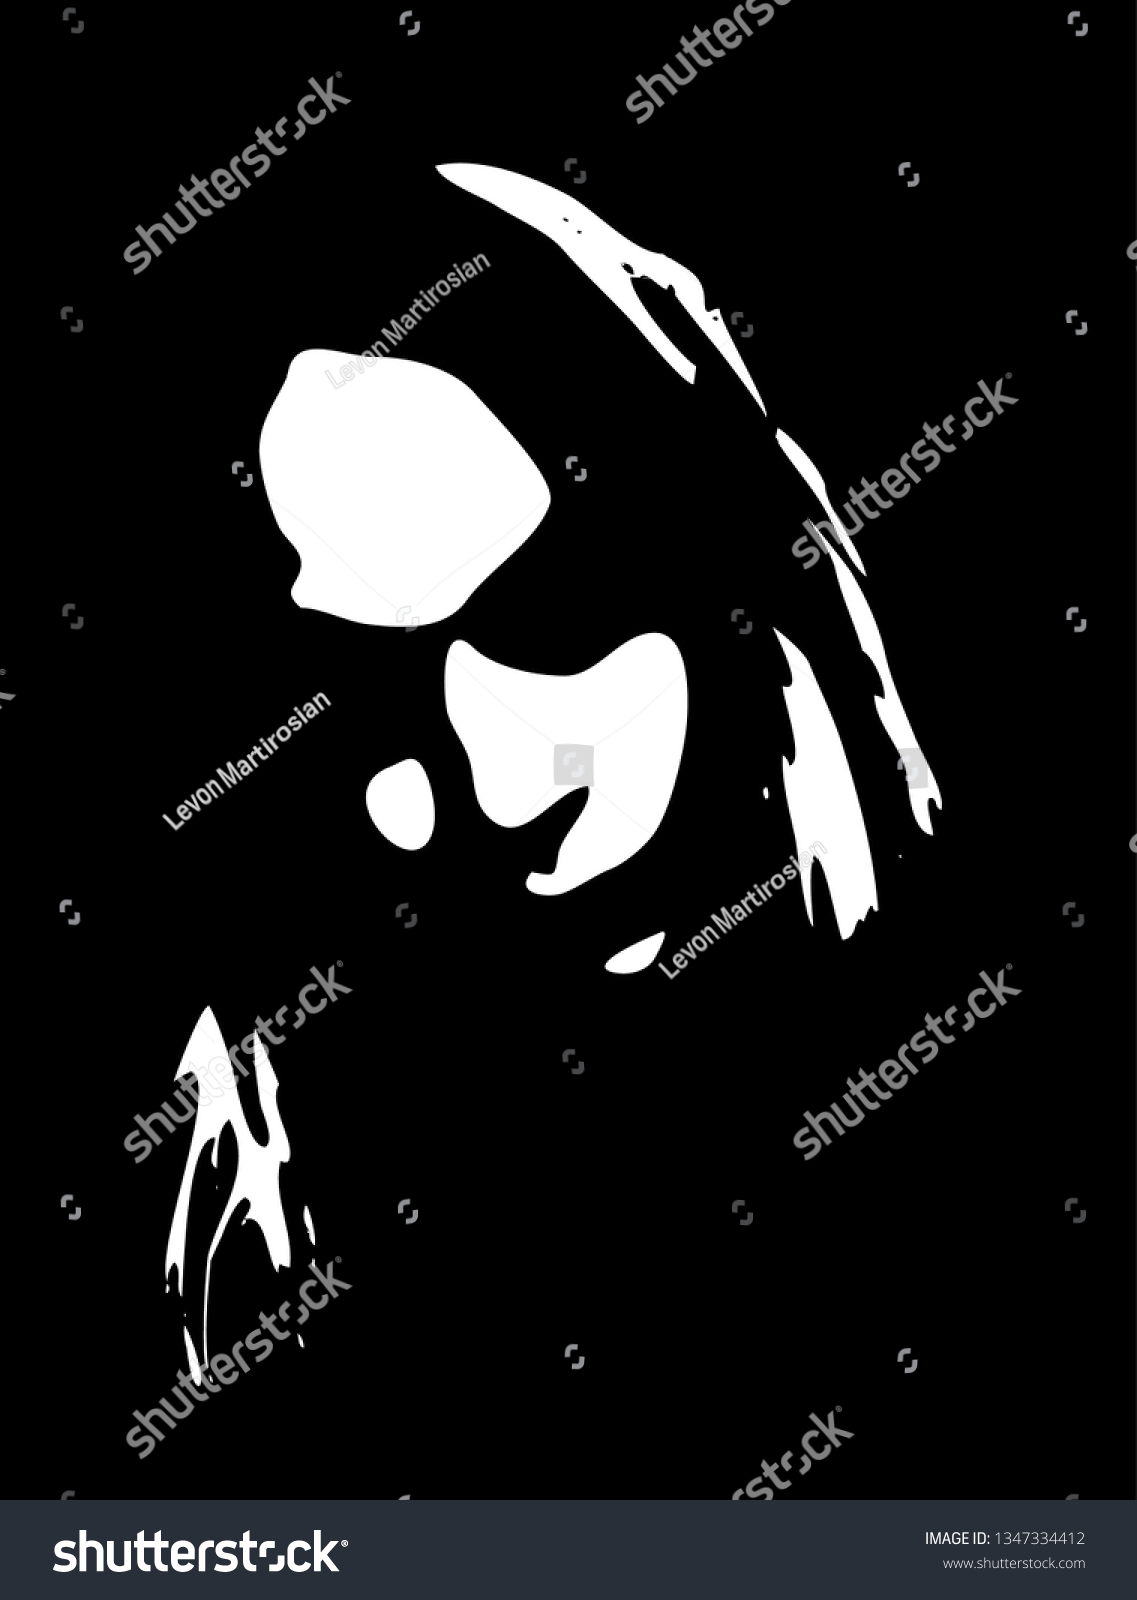 Sexy Young Woman Graffiti Stencil Face Stock Vector Royalty Free 1347334412 Shutterstock 4570